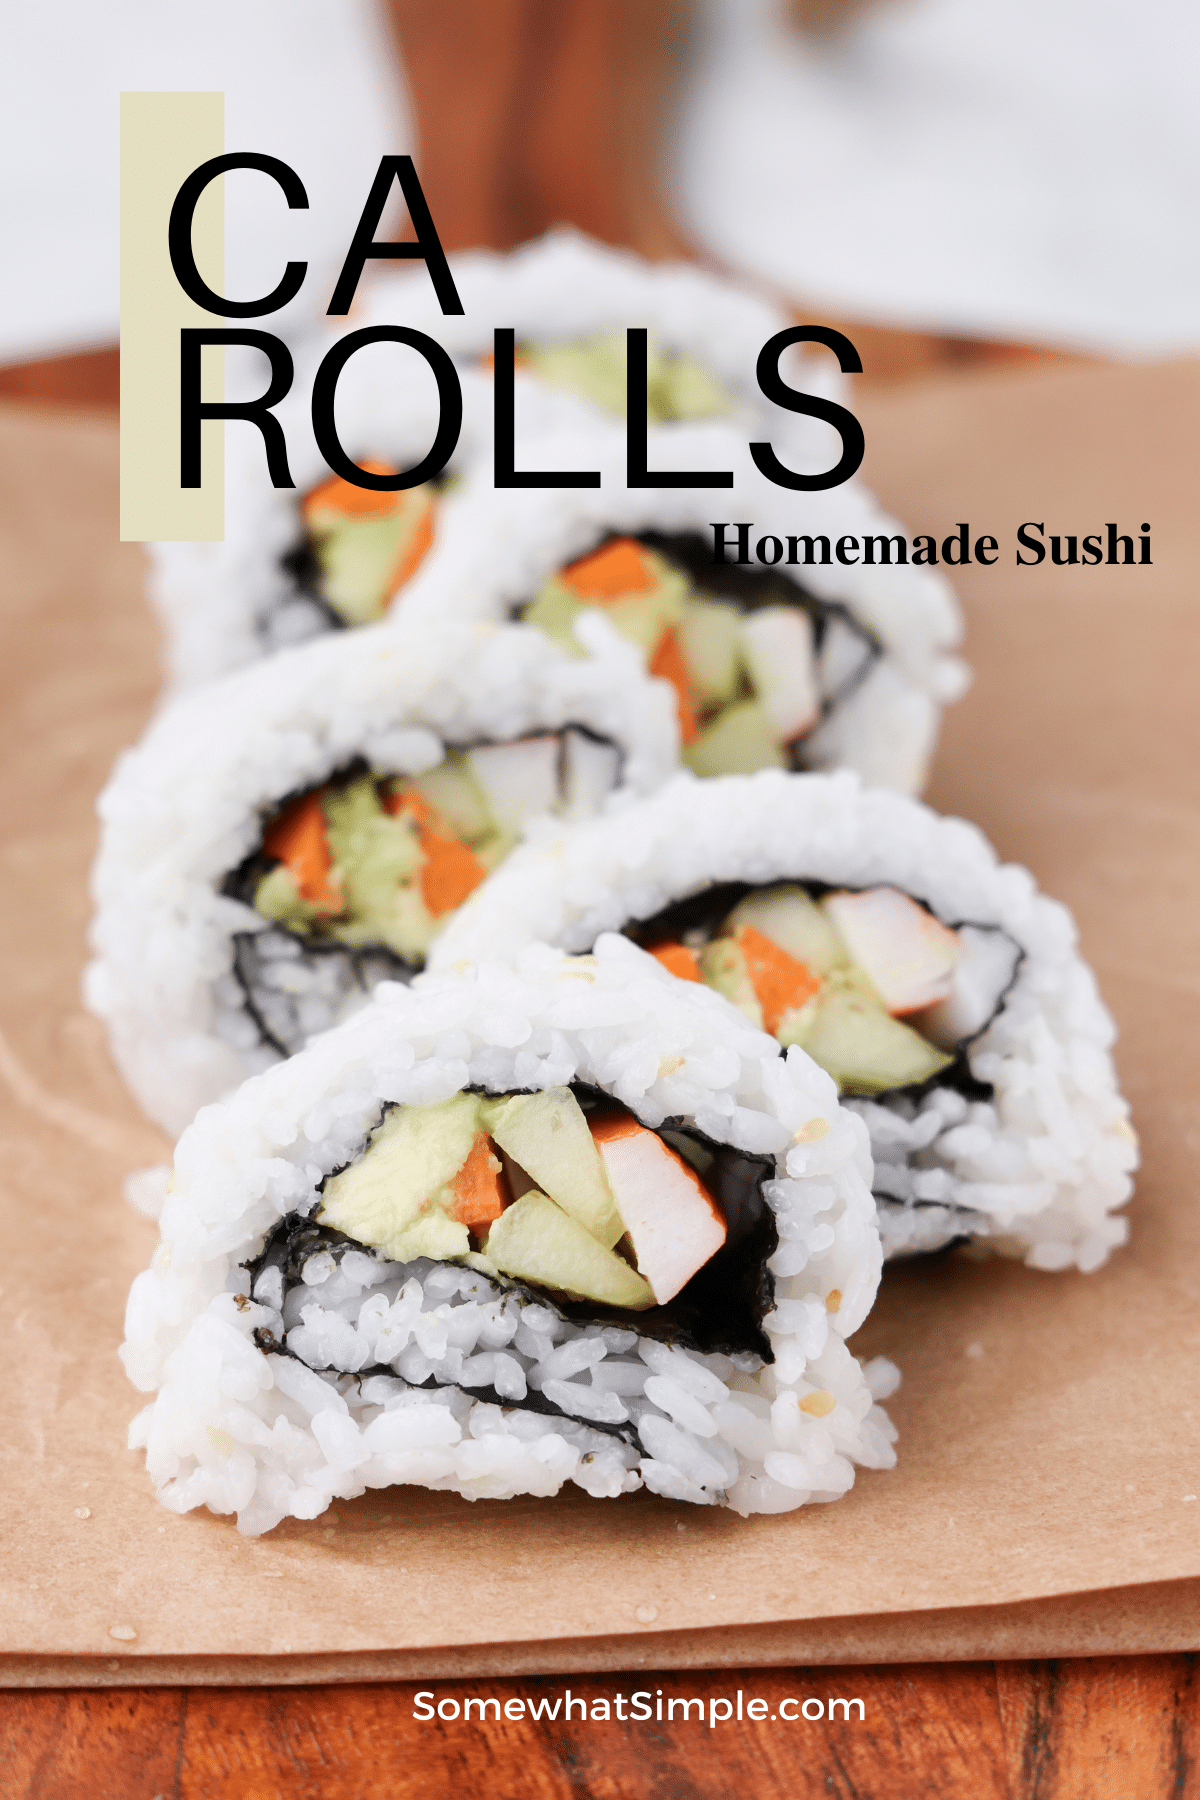 This sushi favorite is full of flavor and easy to make. If you're a sushi pro or a newbie, our California Roll recipe is sure to impress! via @somewhatsimple